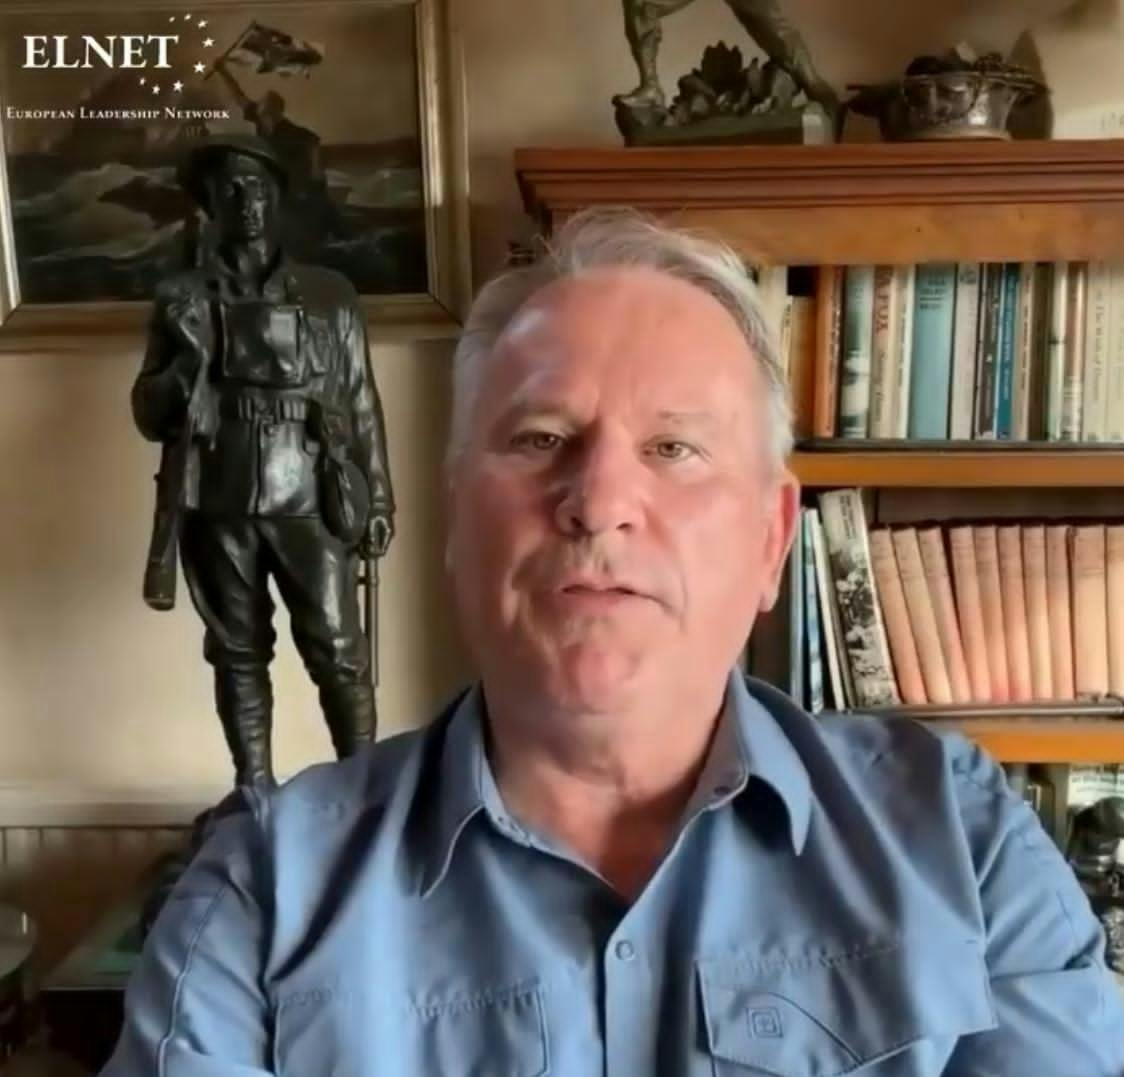 141: Col. Richard Kemp: ”The UN, US and UK just threw the Israeli hostages under the bus”